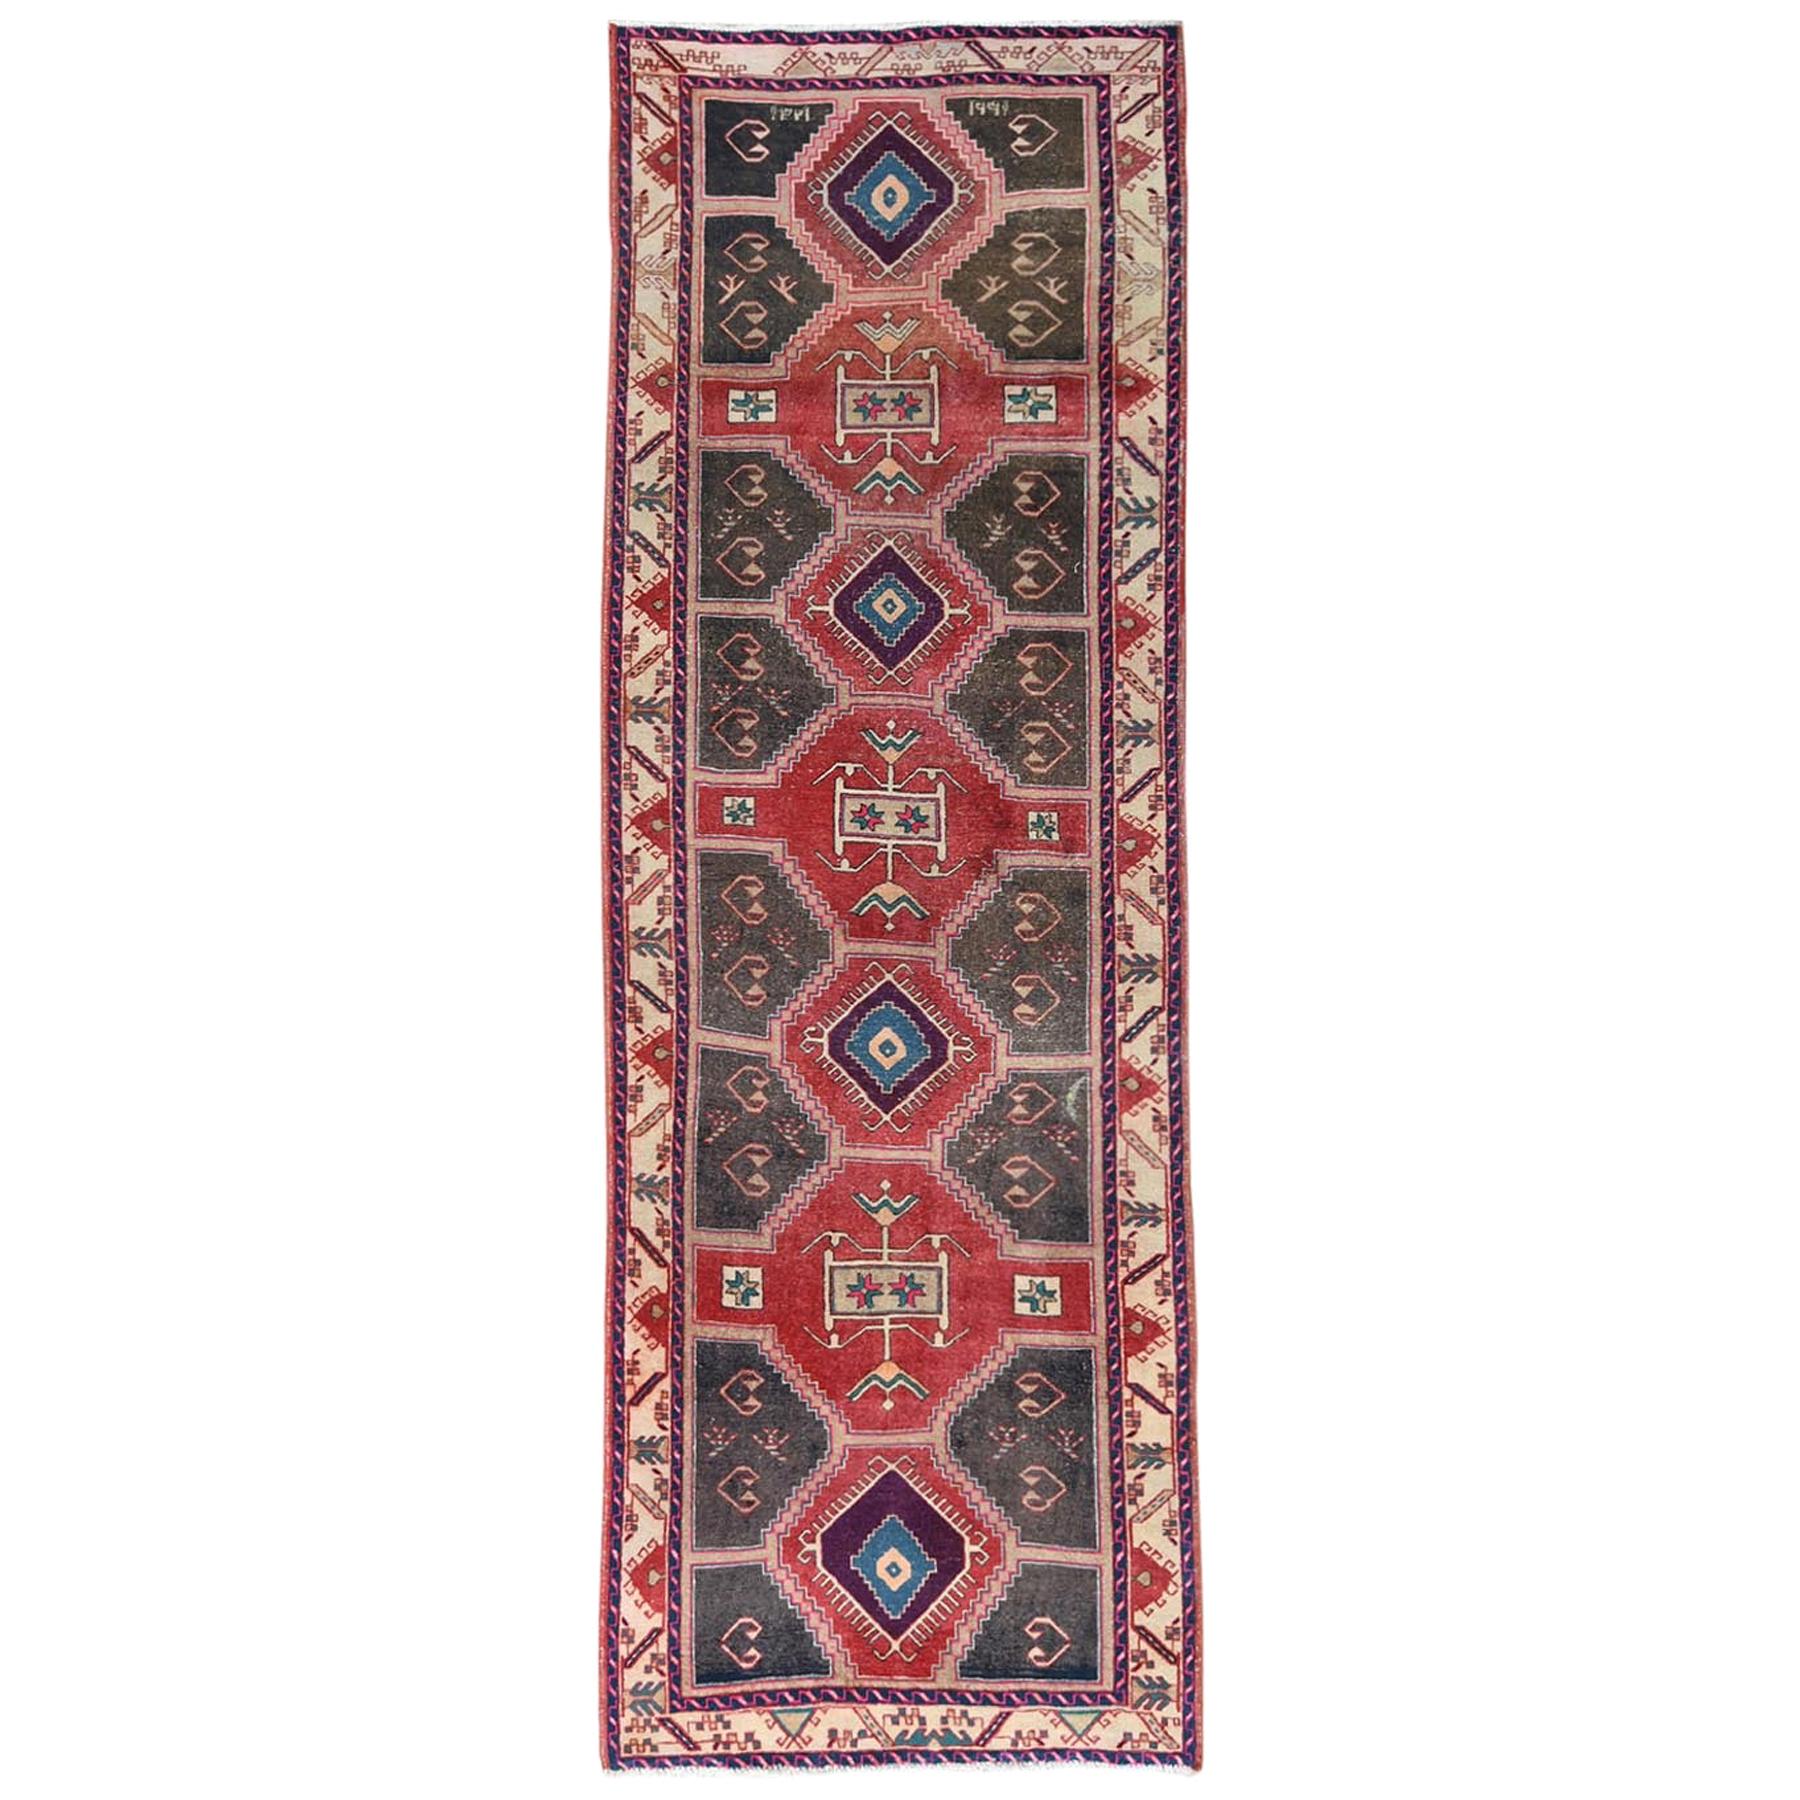 This fabulous hand-knotted carpet has been created and designed for extra strength and durability. This rug has been handcrafted for weeks in the traditional method that is used to make rugs. This is truly a one-of-kind piece.

Exact rug size in